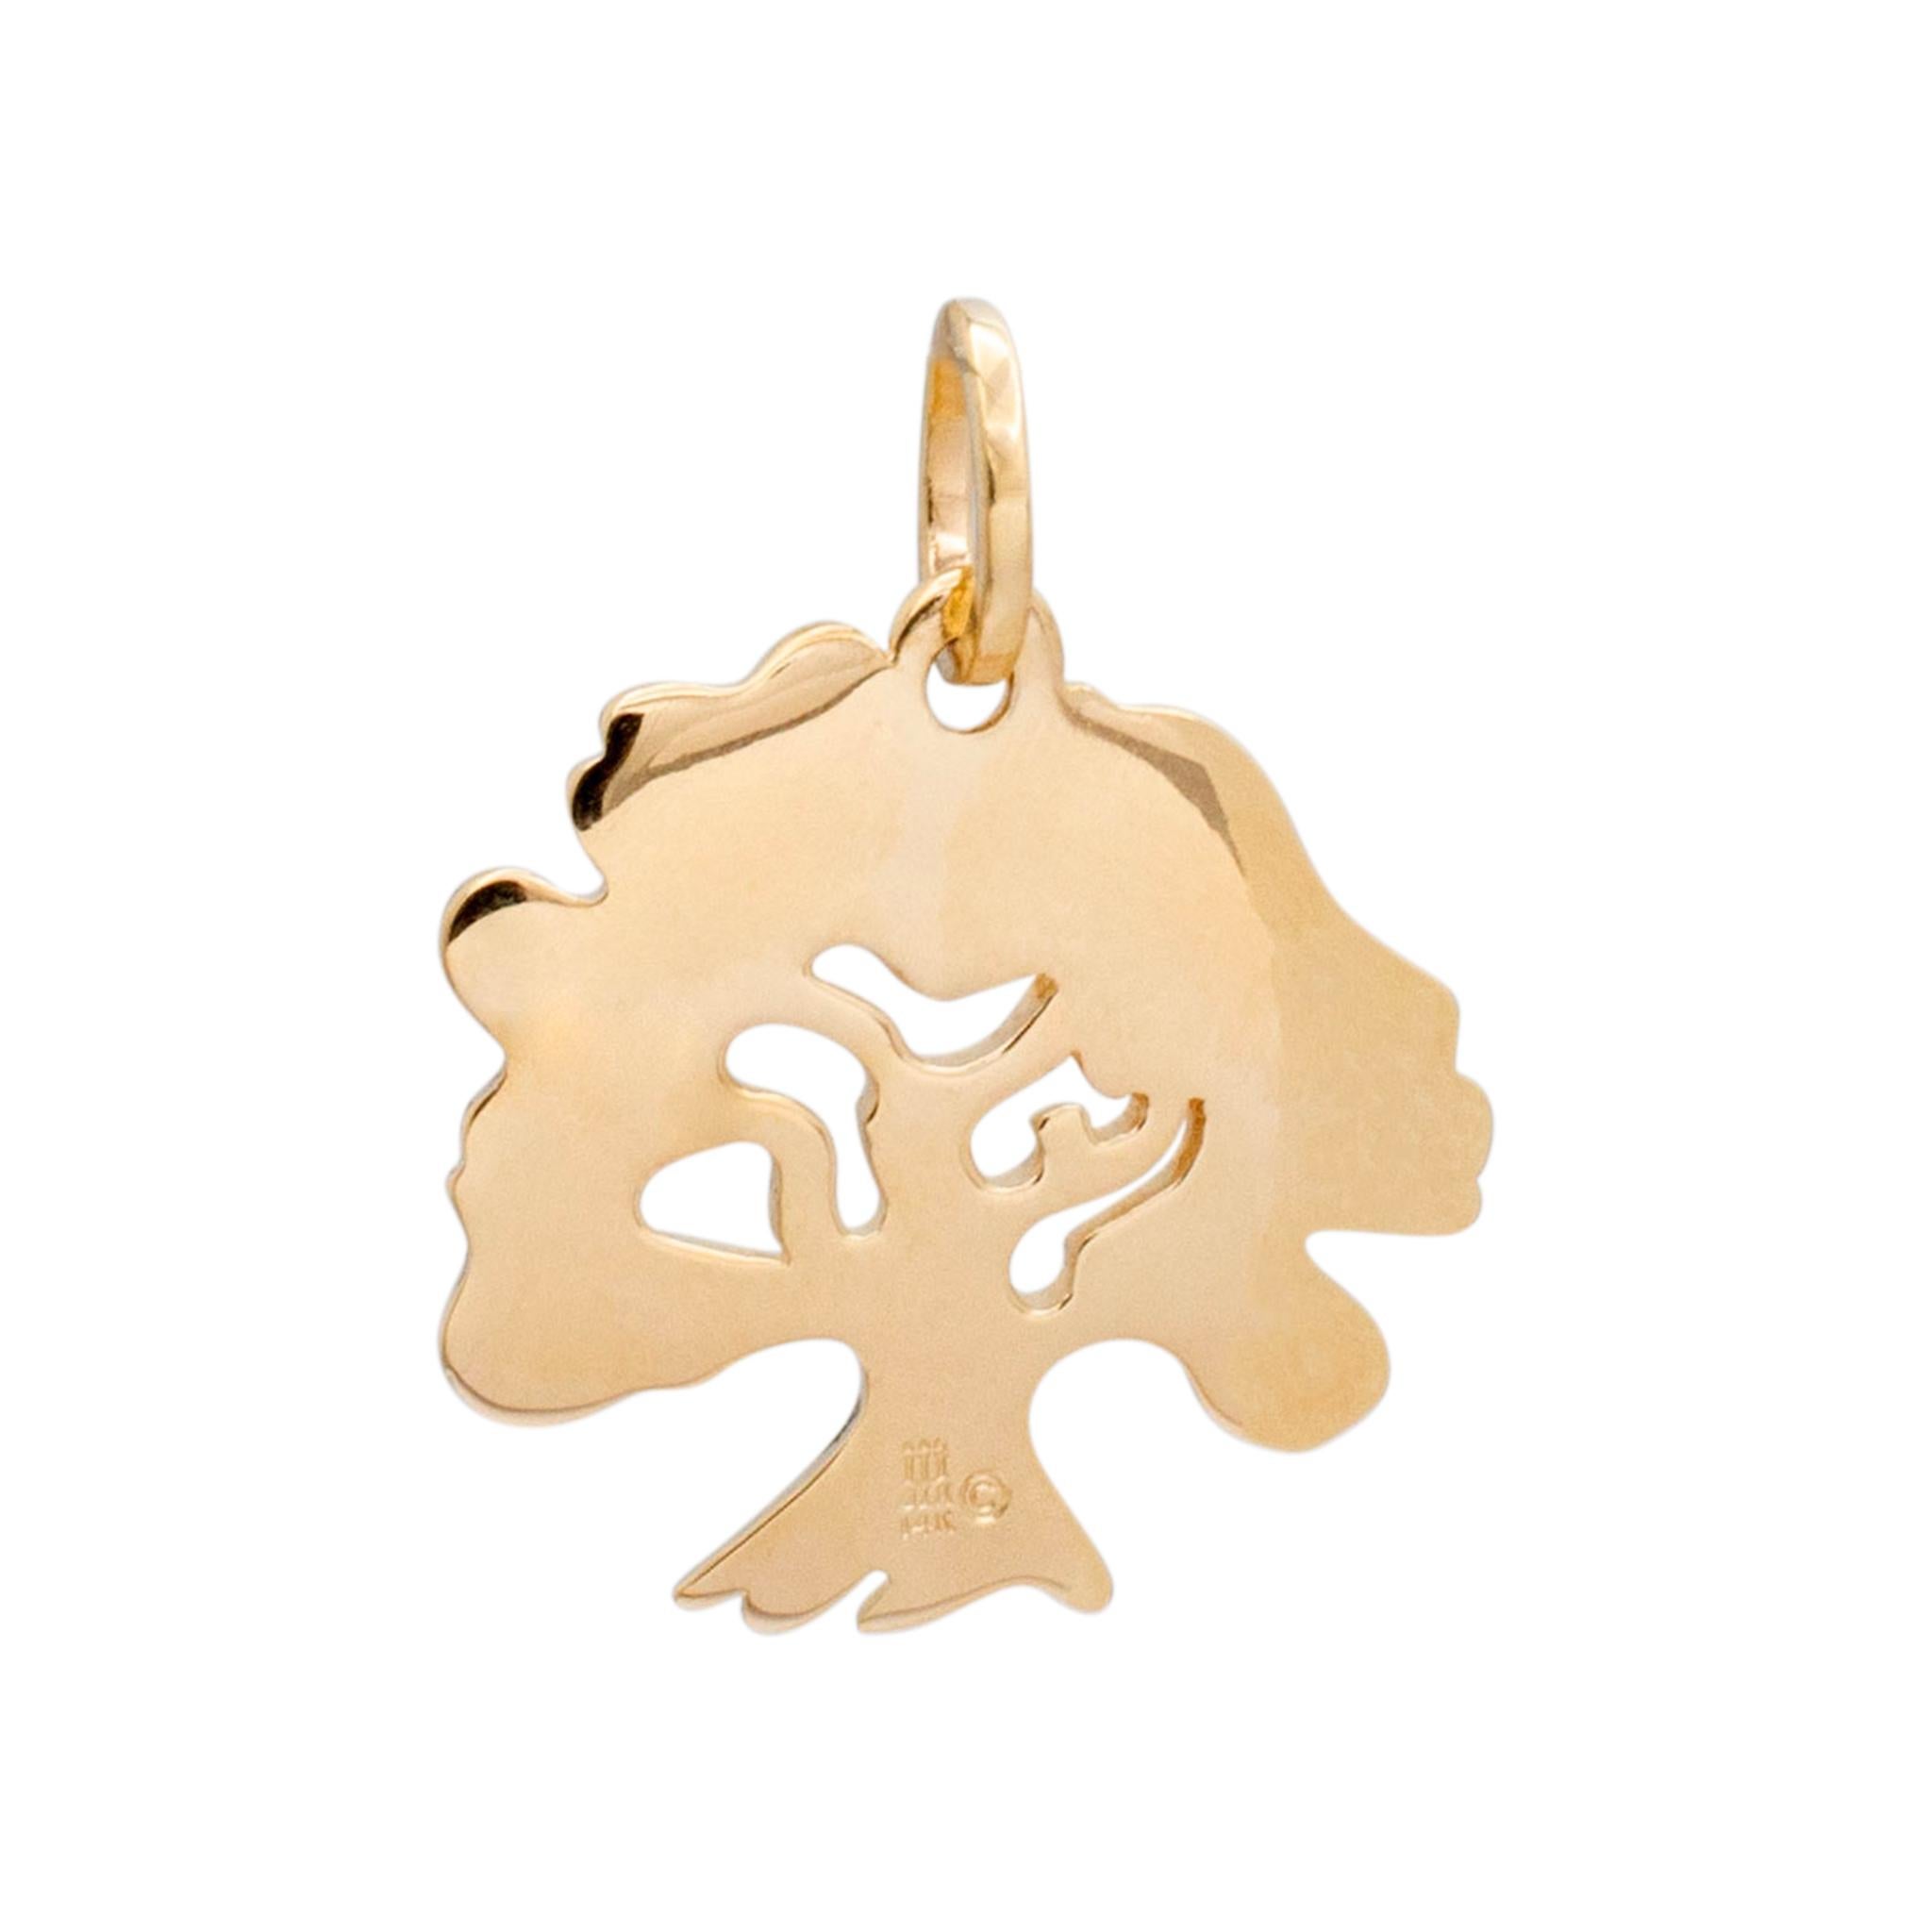 Brand: James Avery

Gender: Unisex

Metal Type: 14K Yellow Gold

Length: 1.25 inches

Width: 39.00 mm

Weight: 12.40 grams

14K yellow gold floral motif pendant. Engraved with 